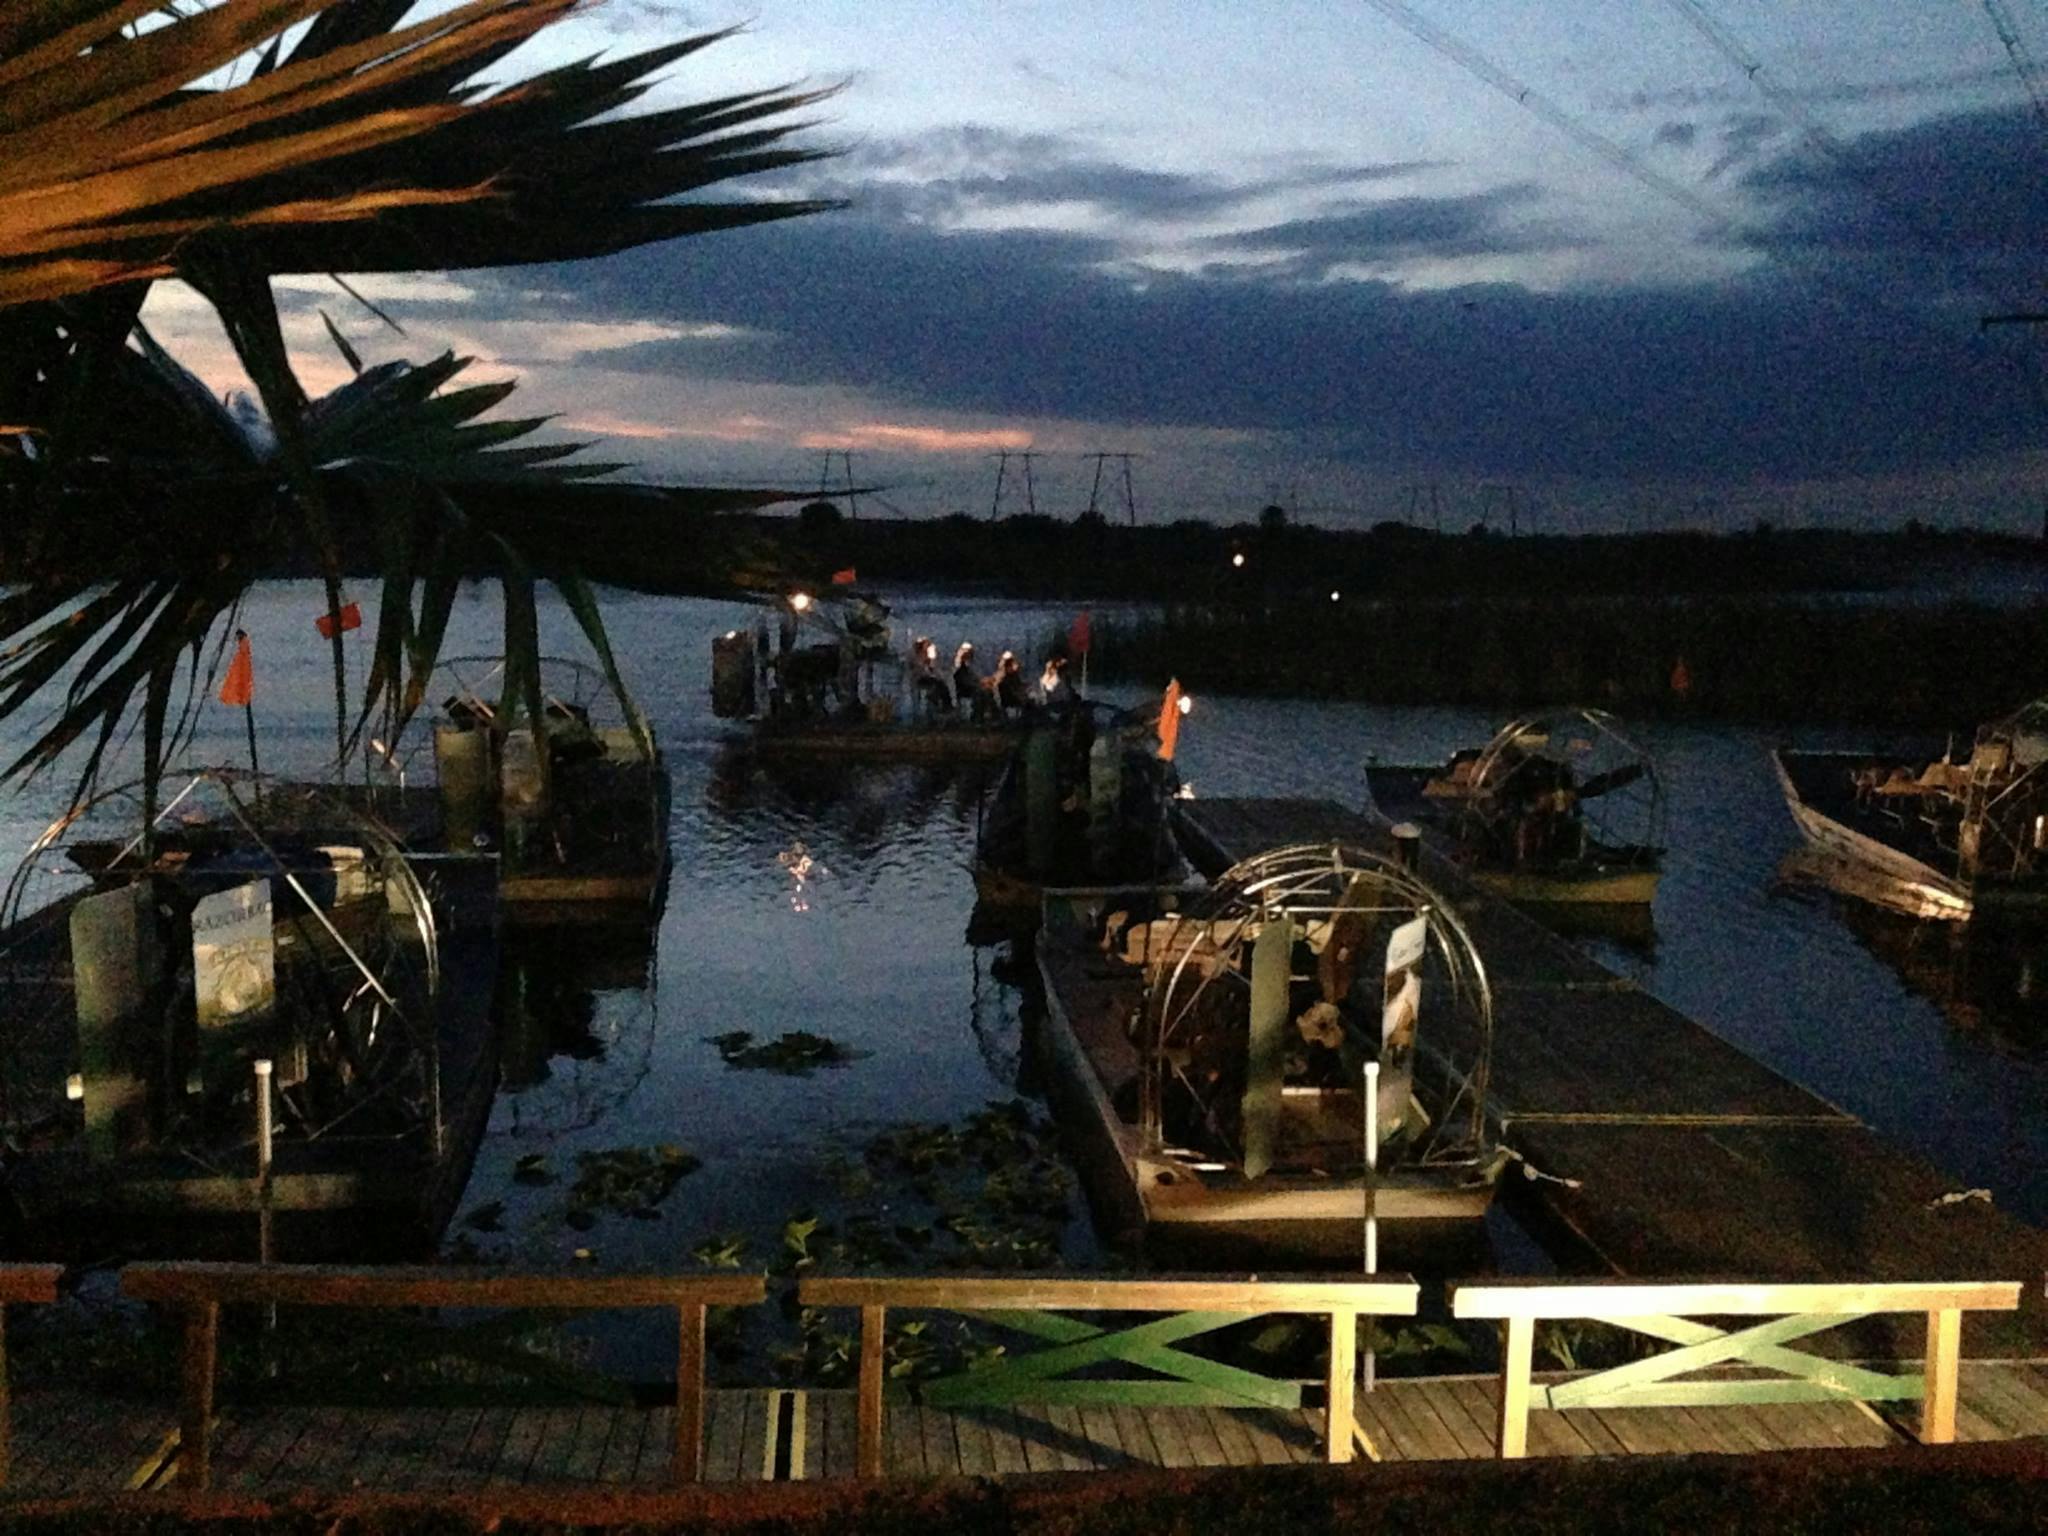 Gator Night 60-minute nighttime airboat tour at Sawgrass Recreation Park